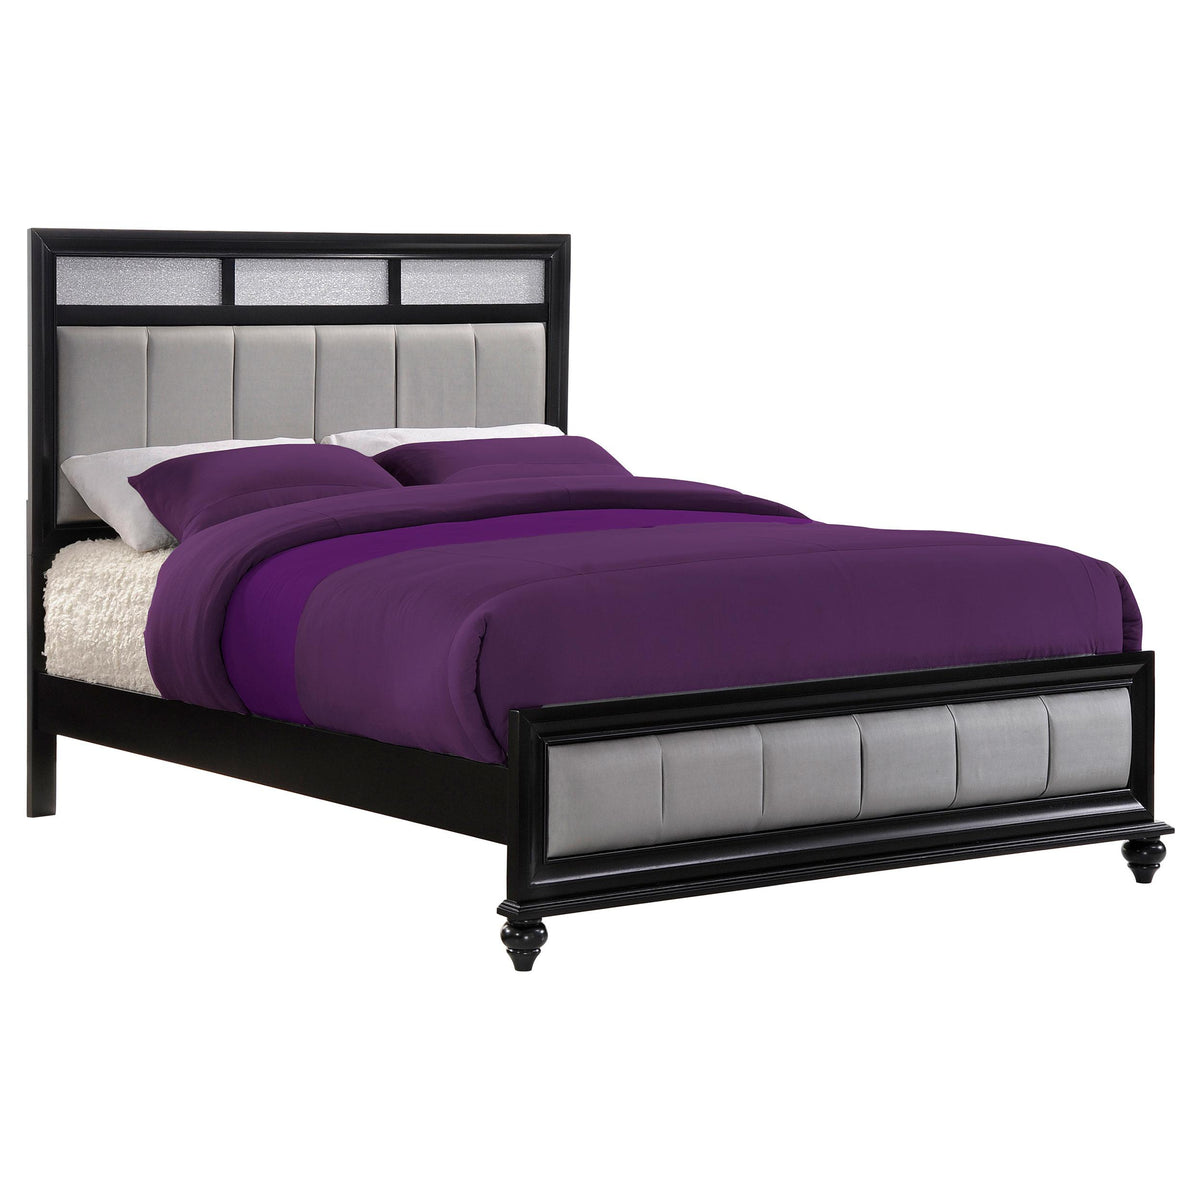 Barzini Queen Upholstered Bed Black and Grey  Half Price Furniture